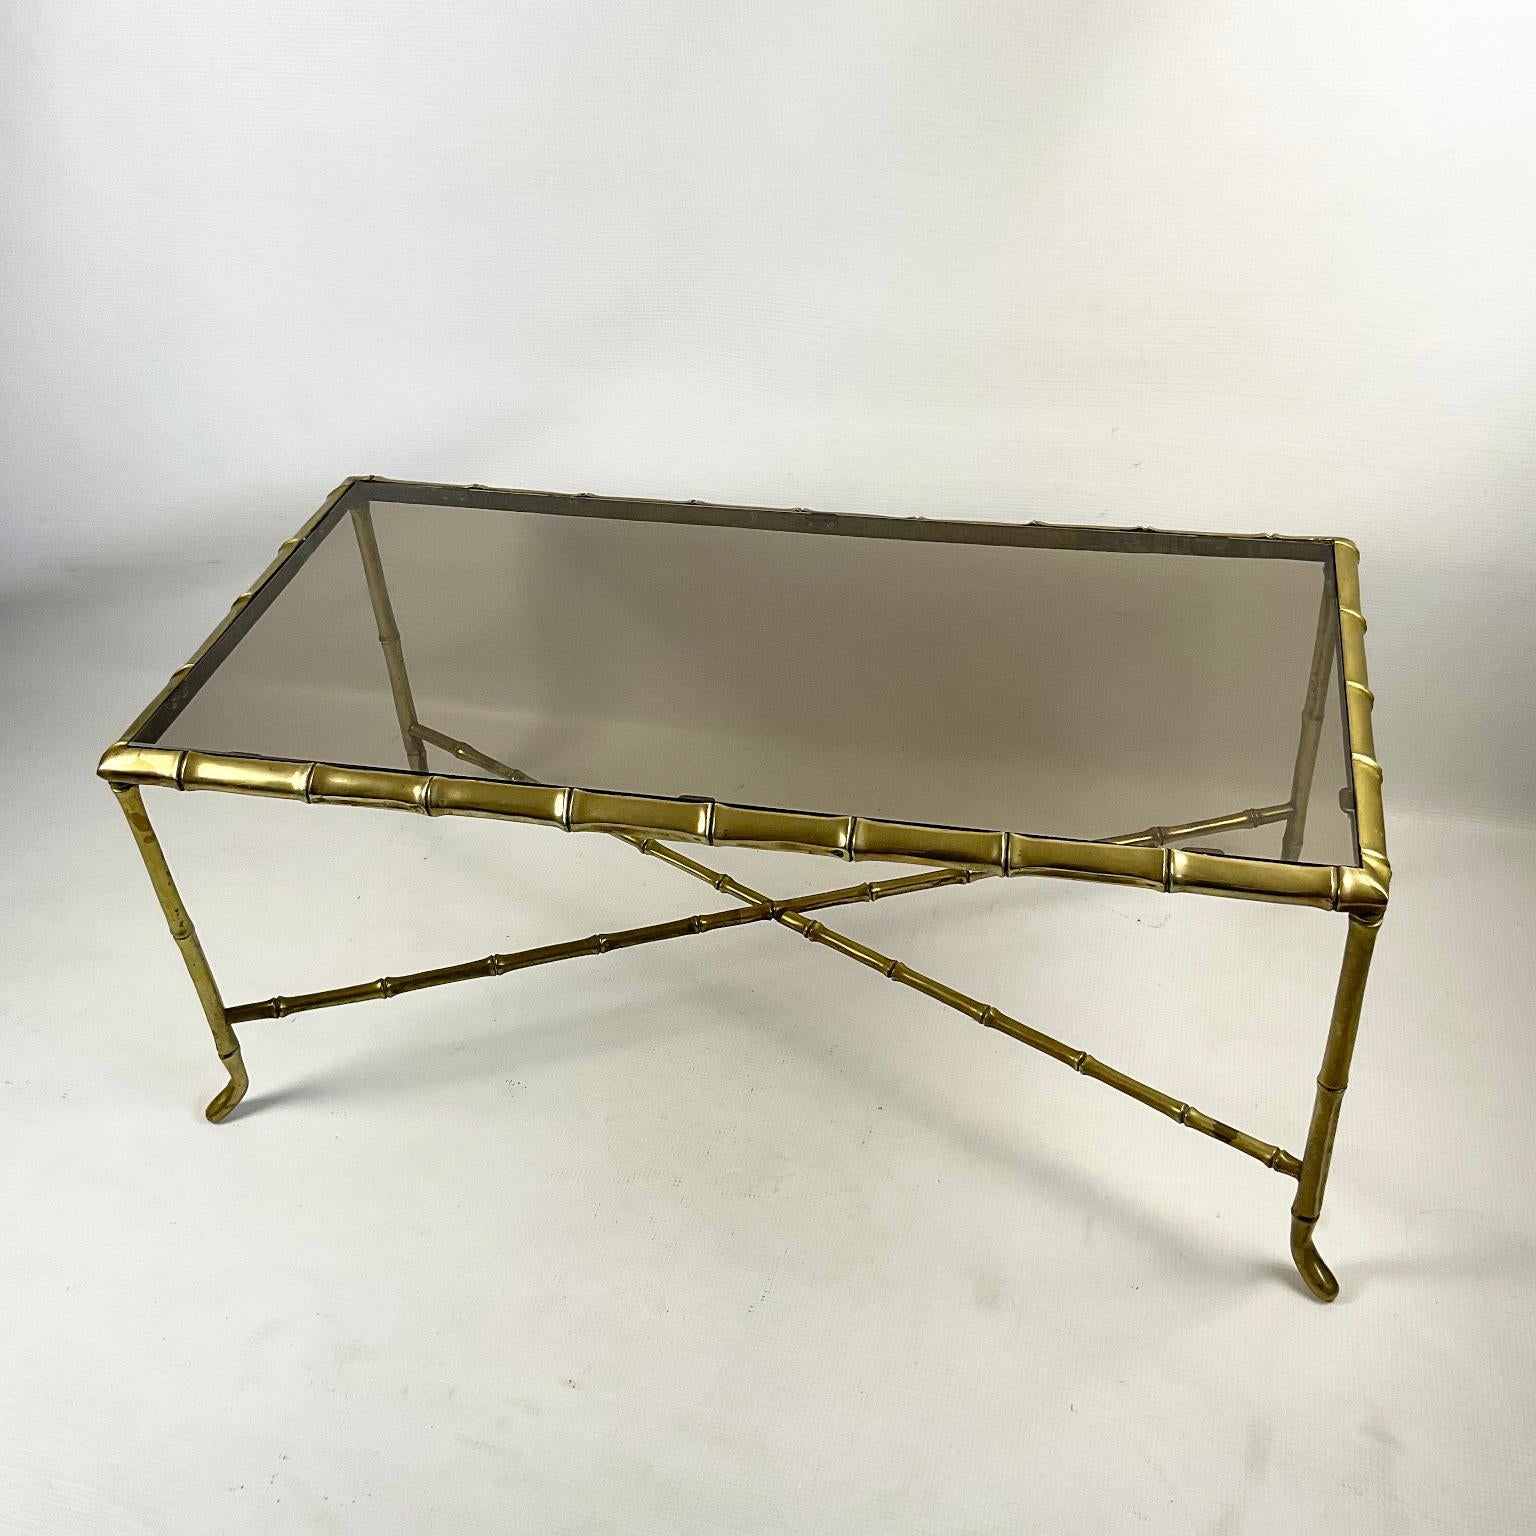 Hollywood Regency Faux Bamboo Bronze Coffee Table Attributed to Maison Baguès France 1940s For Sale